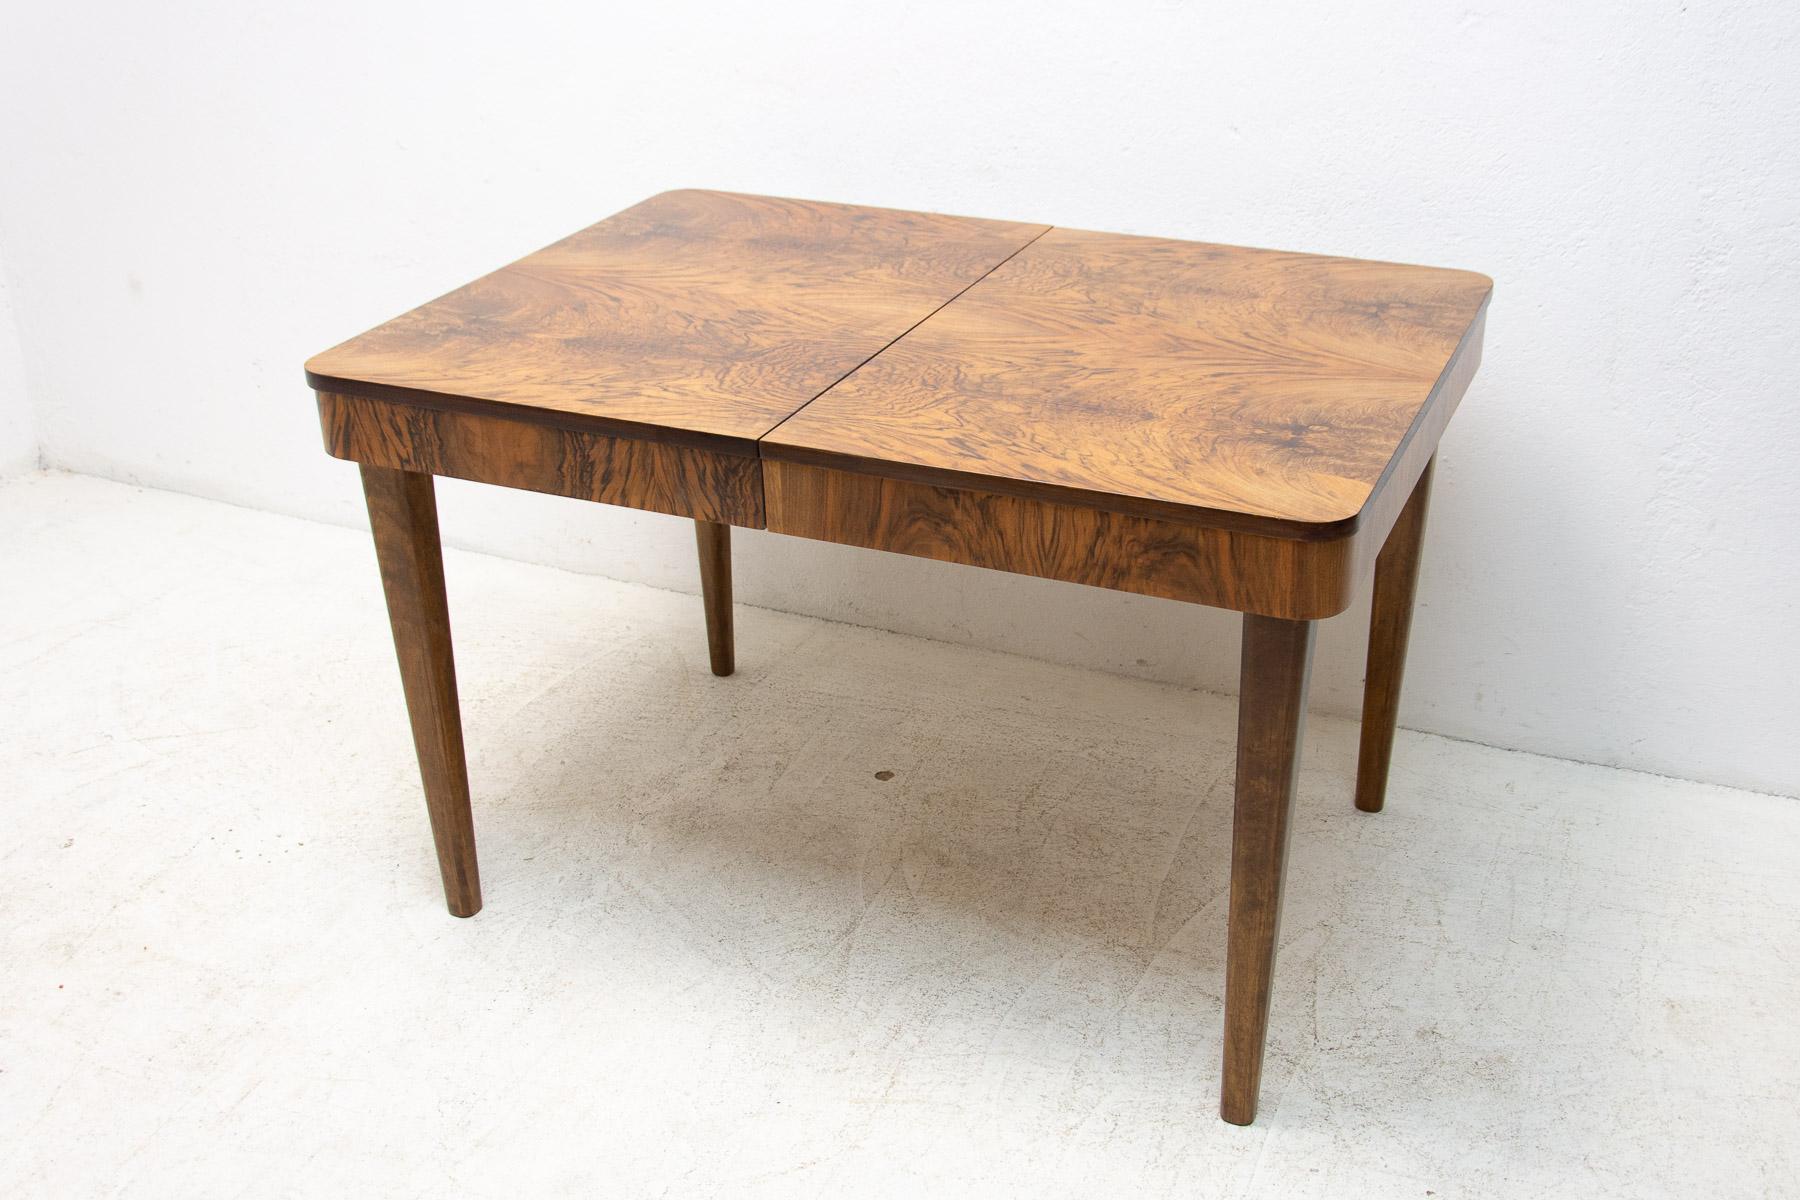 This adjustable dining table was designed by Jindrich Halabala and made in the 1940s in the former Czechoslovakia. The table is in ART DECO style and was fully renovated to high gloss finish.

The material is a combination of solid wood and walnut